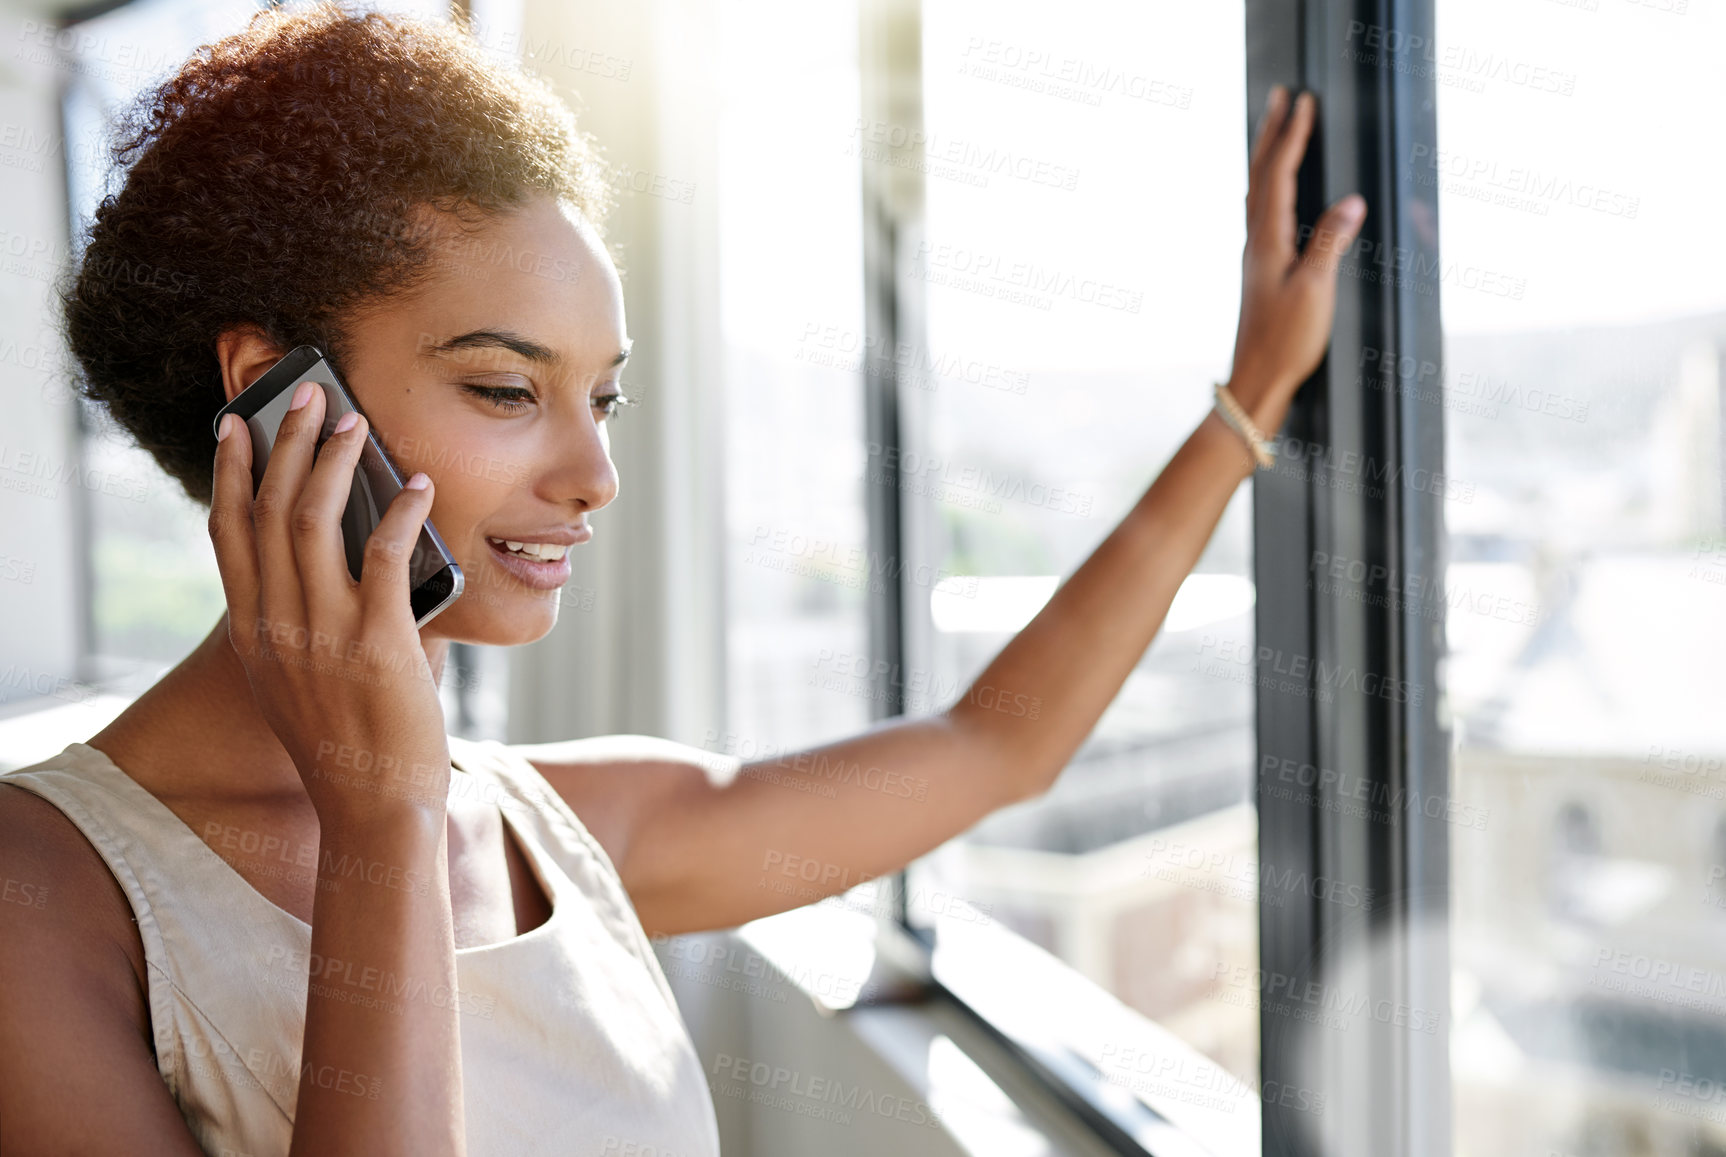 Buy stock photo A young businesswoman talking on her cellphone while standing by her office window